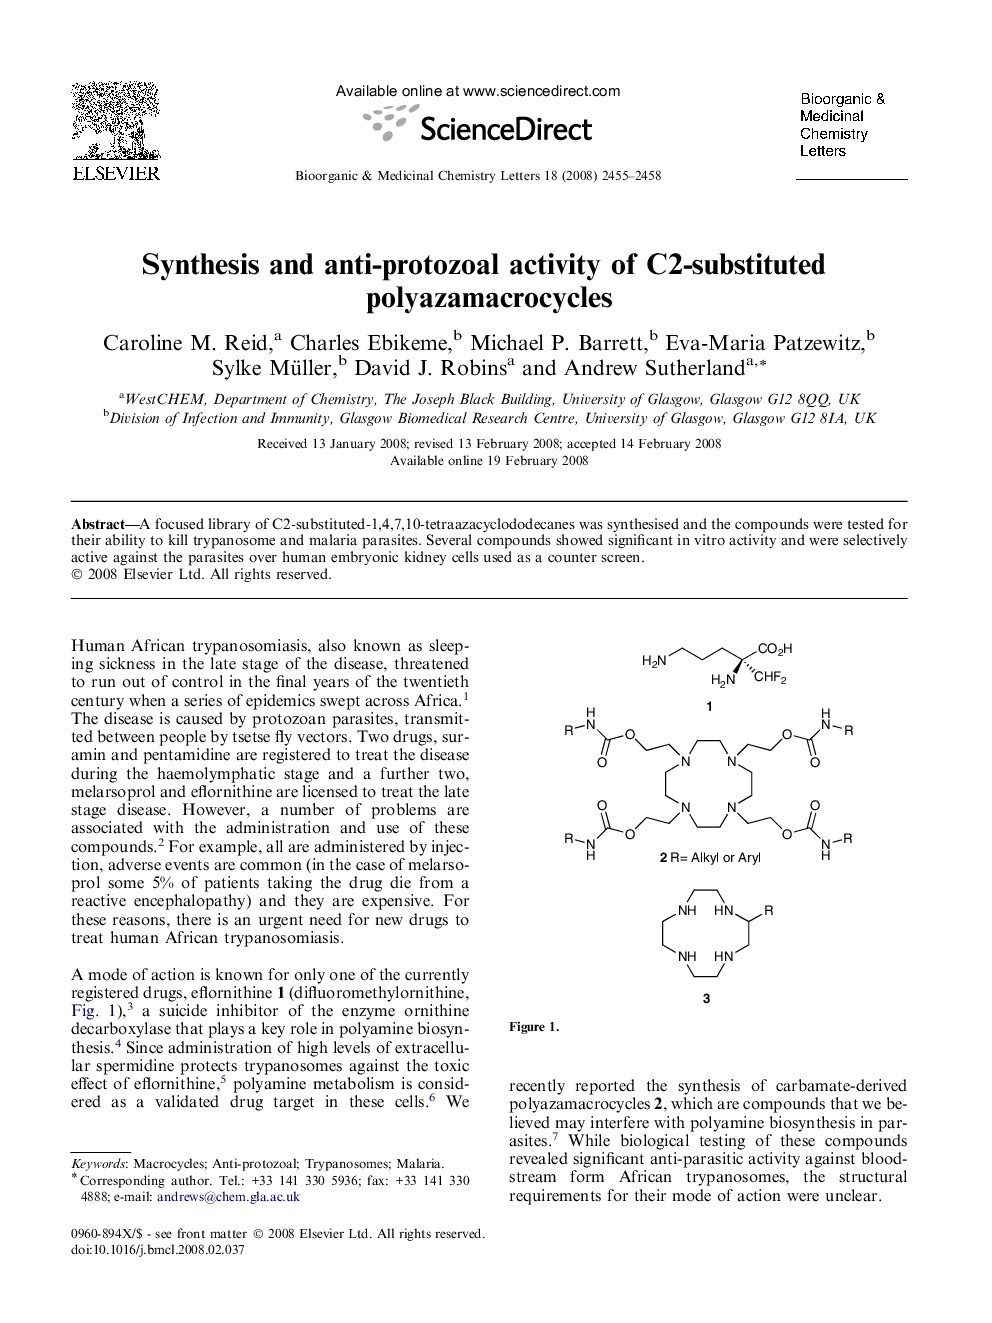 Synthesis and anti-protozoal activity of C2-substituted polyazamacrocycles